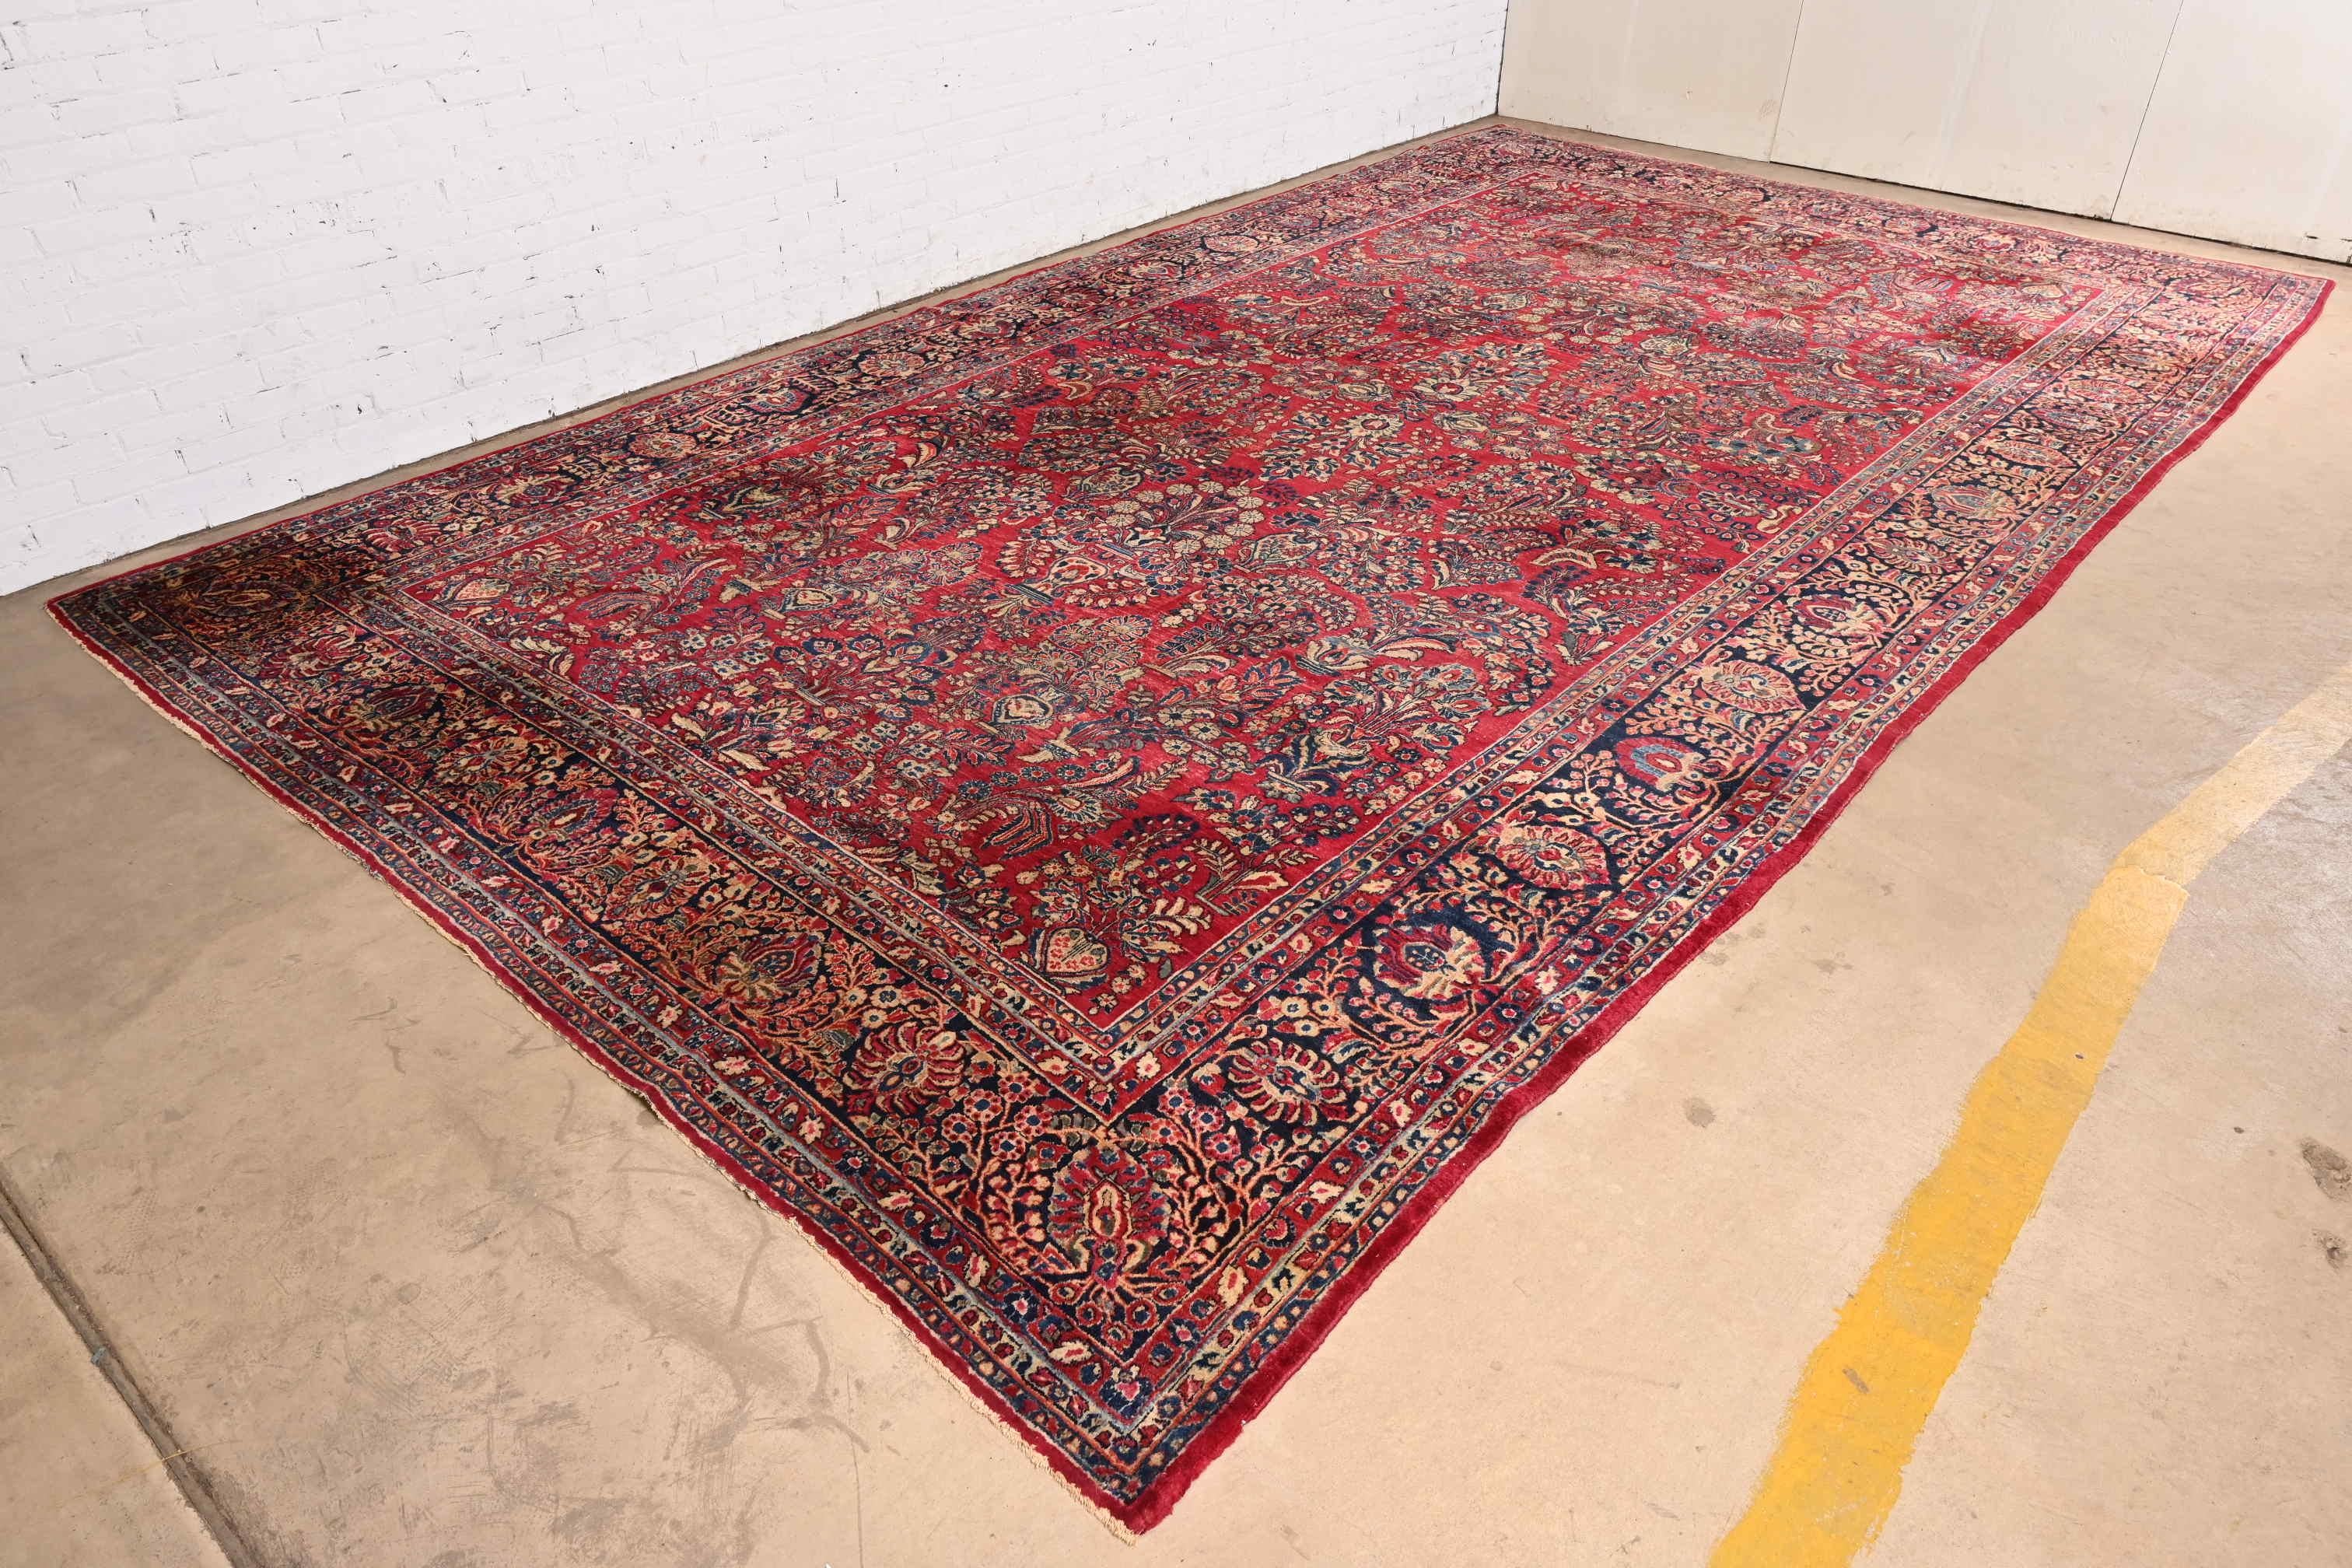 Antique Hand-Knotted Persian Sarouk Large Room Size Wool Rug, Circa 1930s In Good Condition For Sale In South Bend, IN